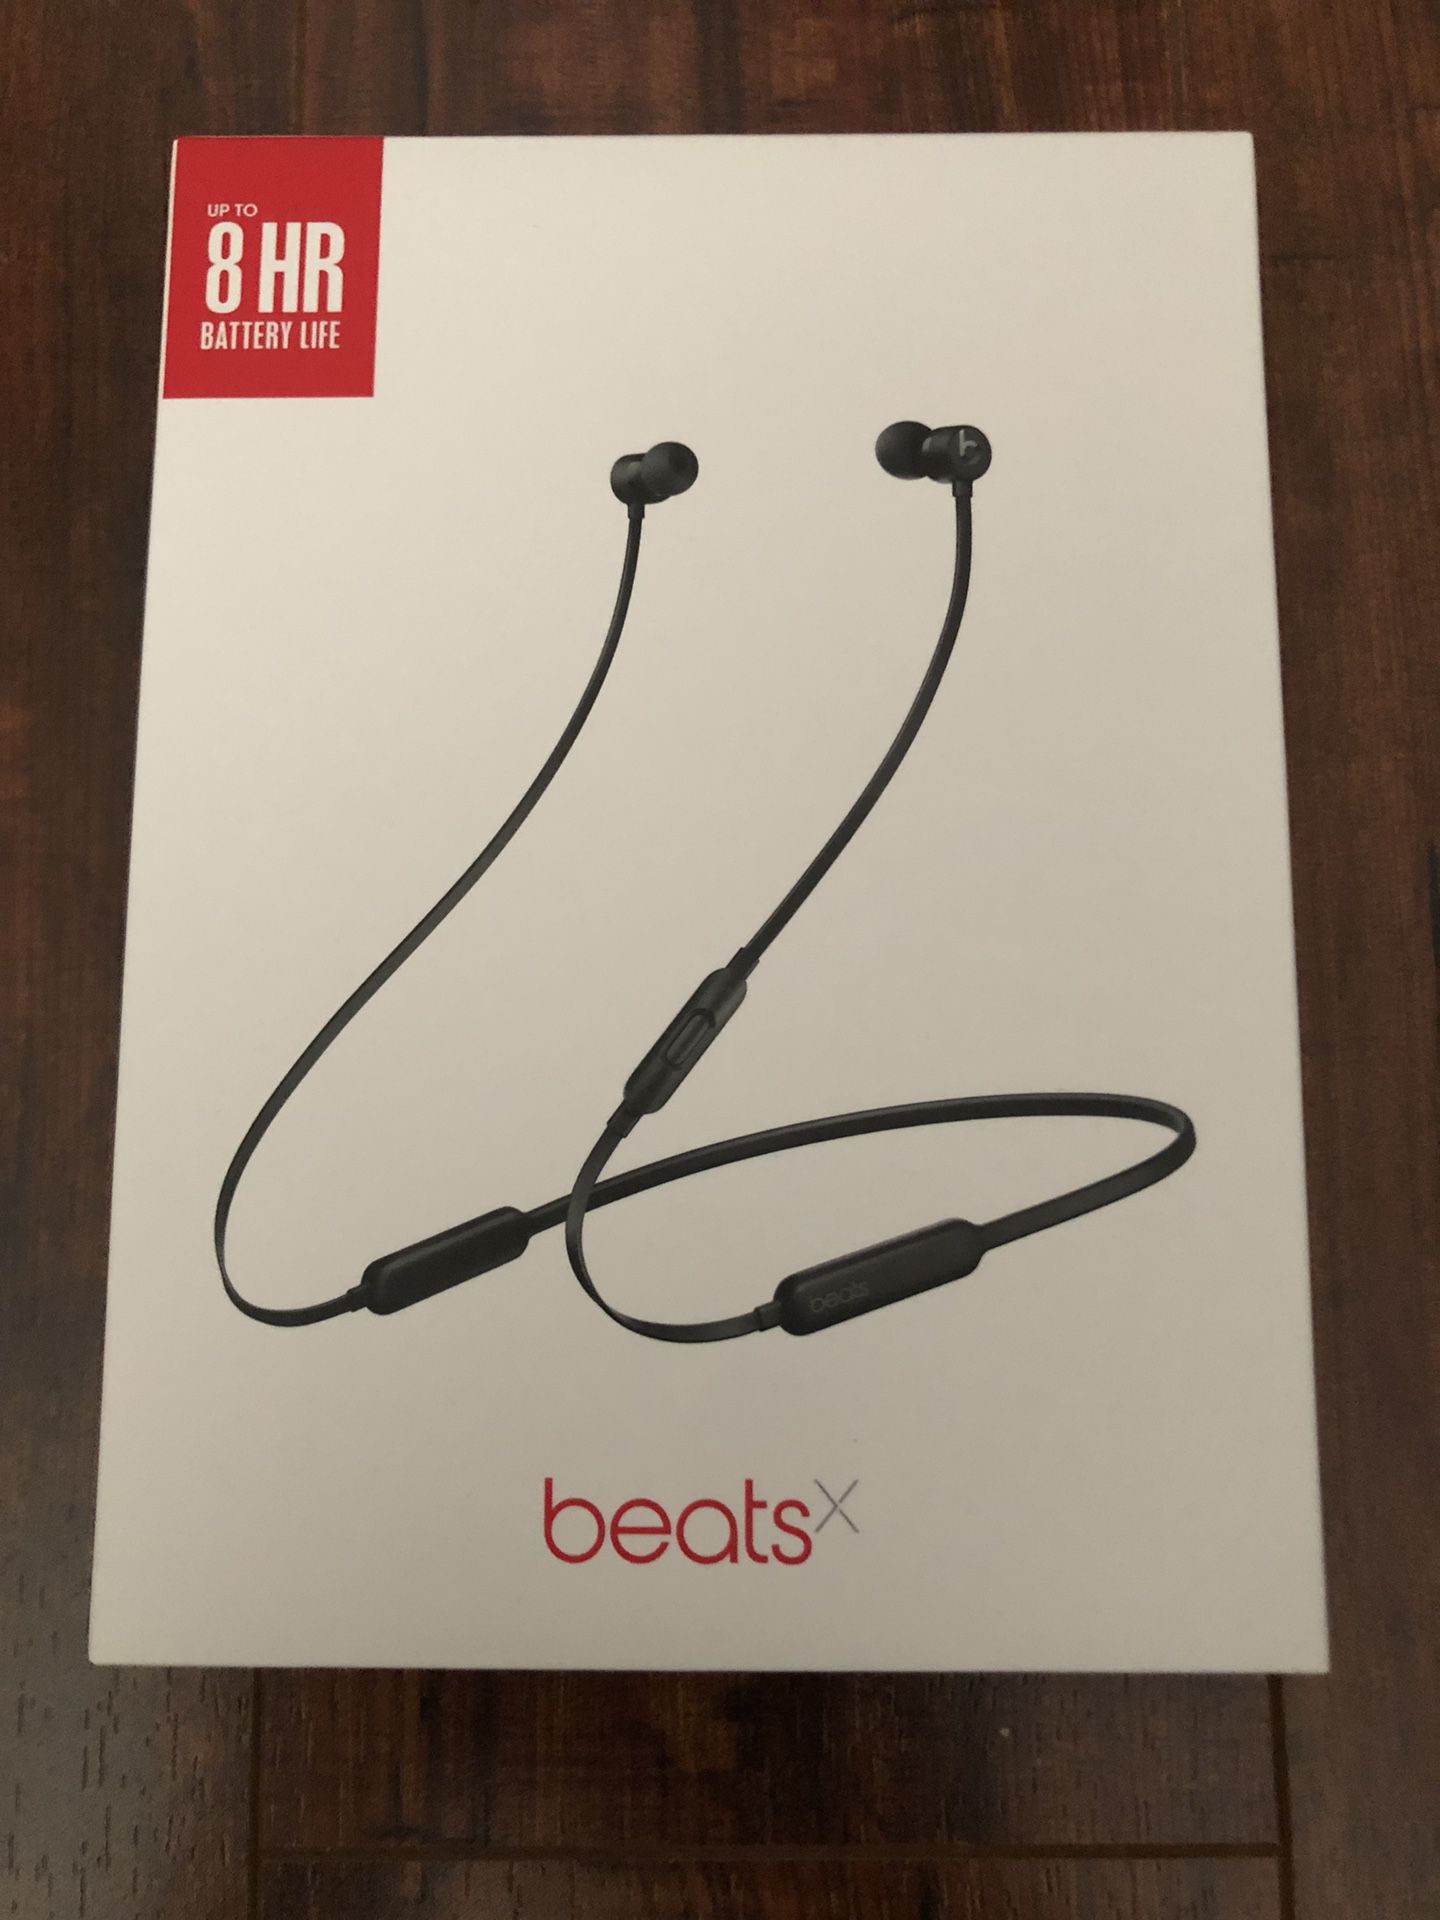 Beats X by Dre: wireless earphones black - Authentic - Purchased from Best Buy